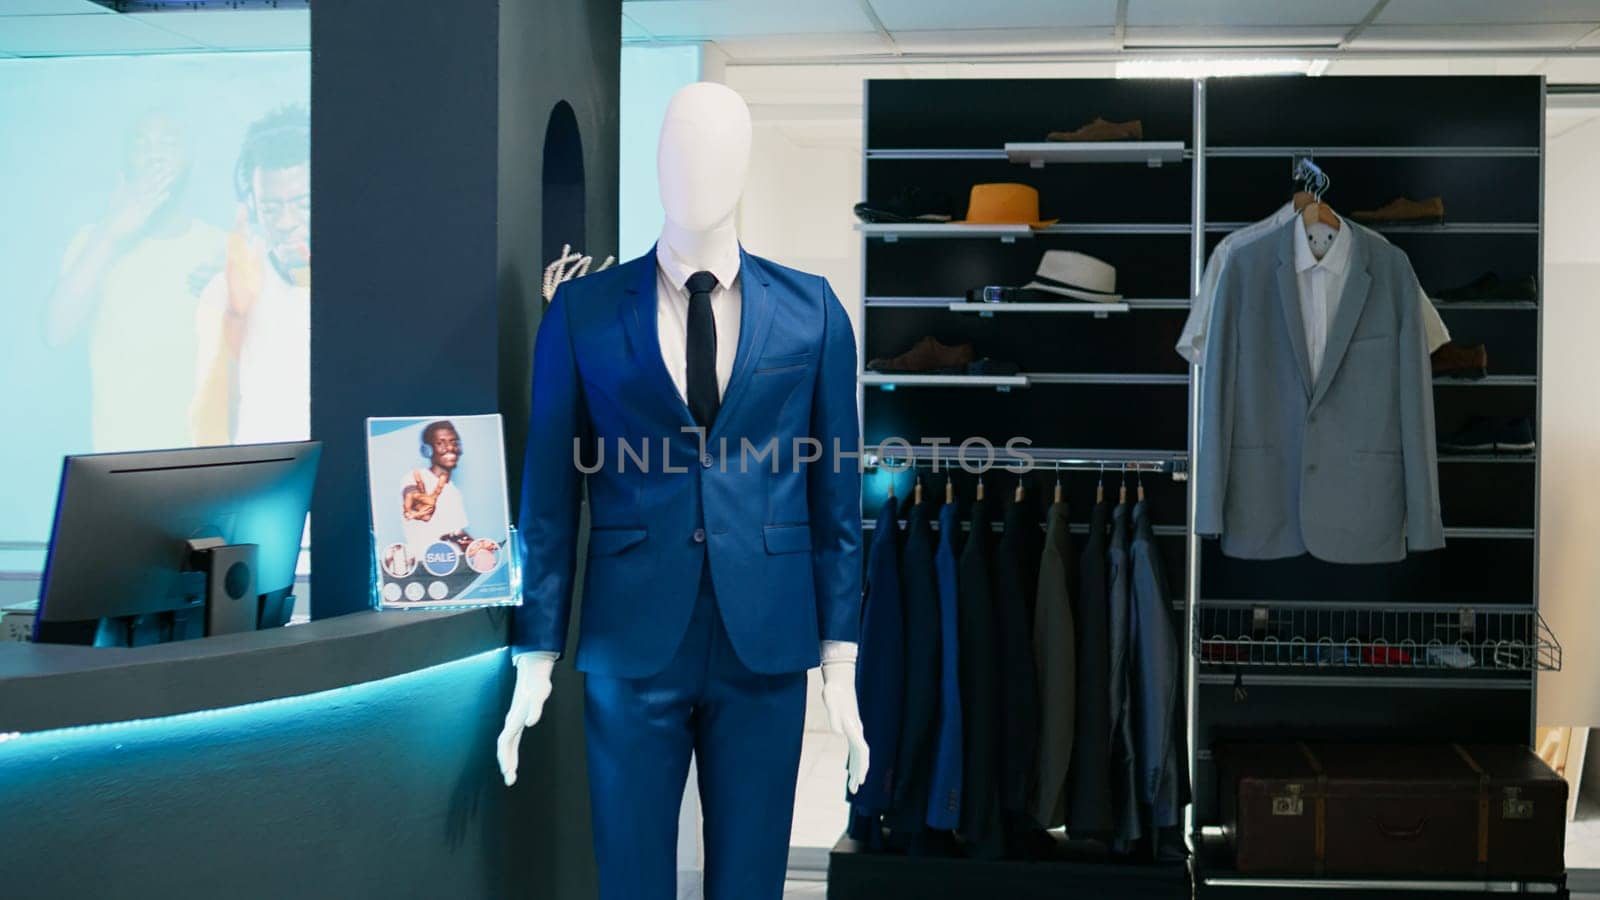 Empty fashion boutique for shopaholic modern people, commercial activity with merchandise in clothing store. Trendy collections of formal or casual wear in retail market shopping center.